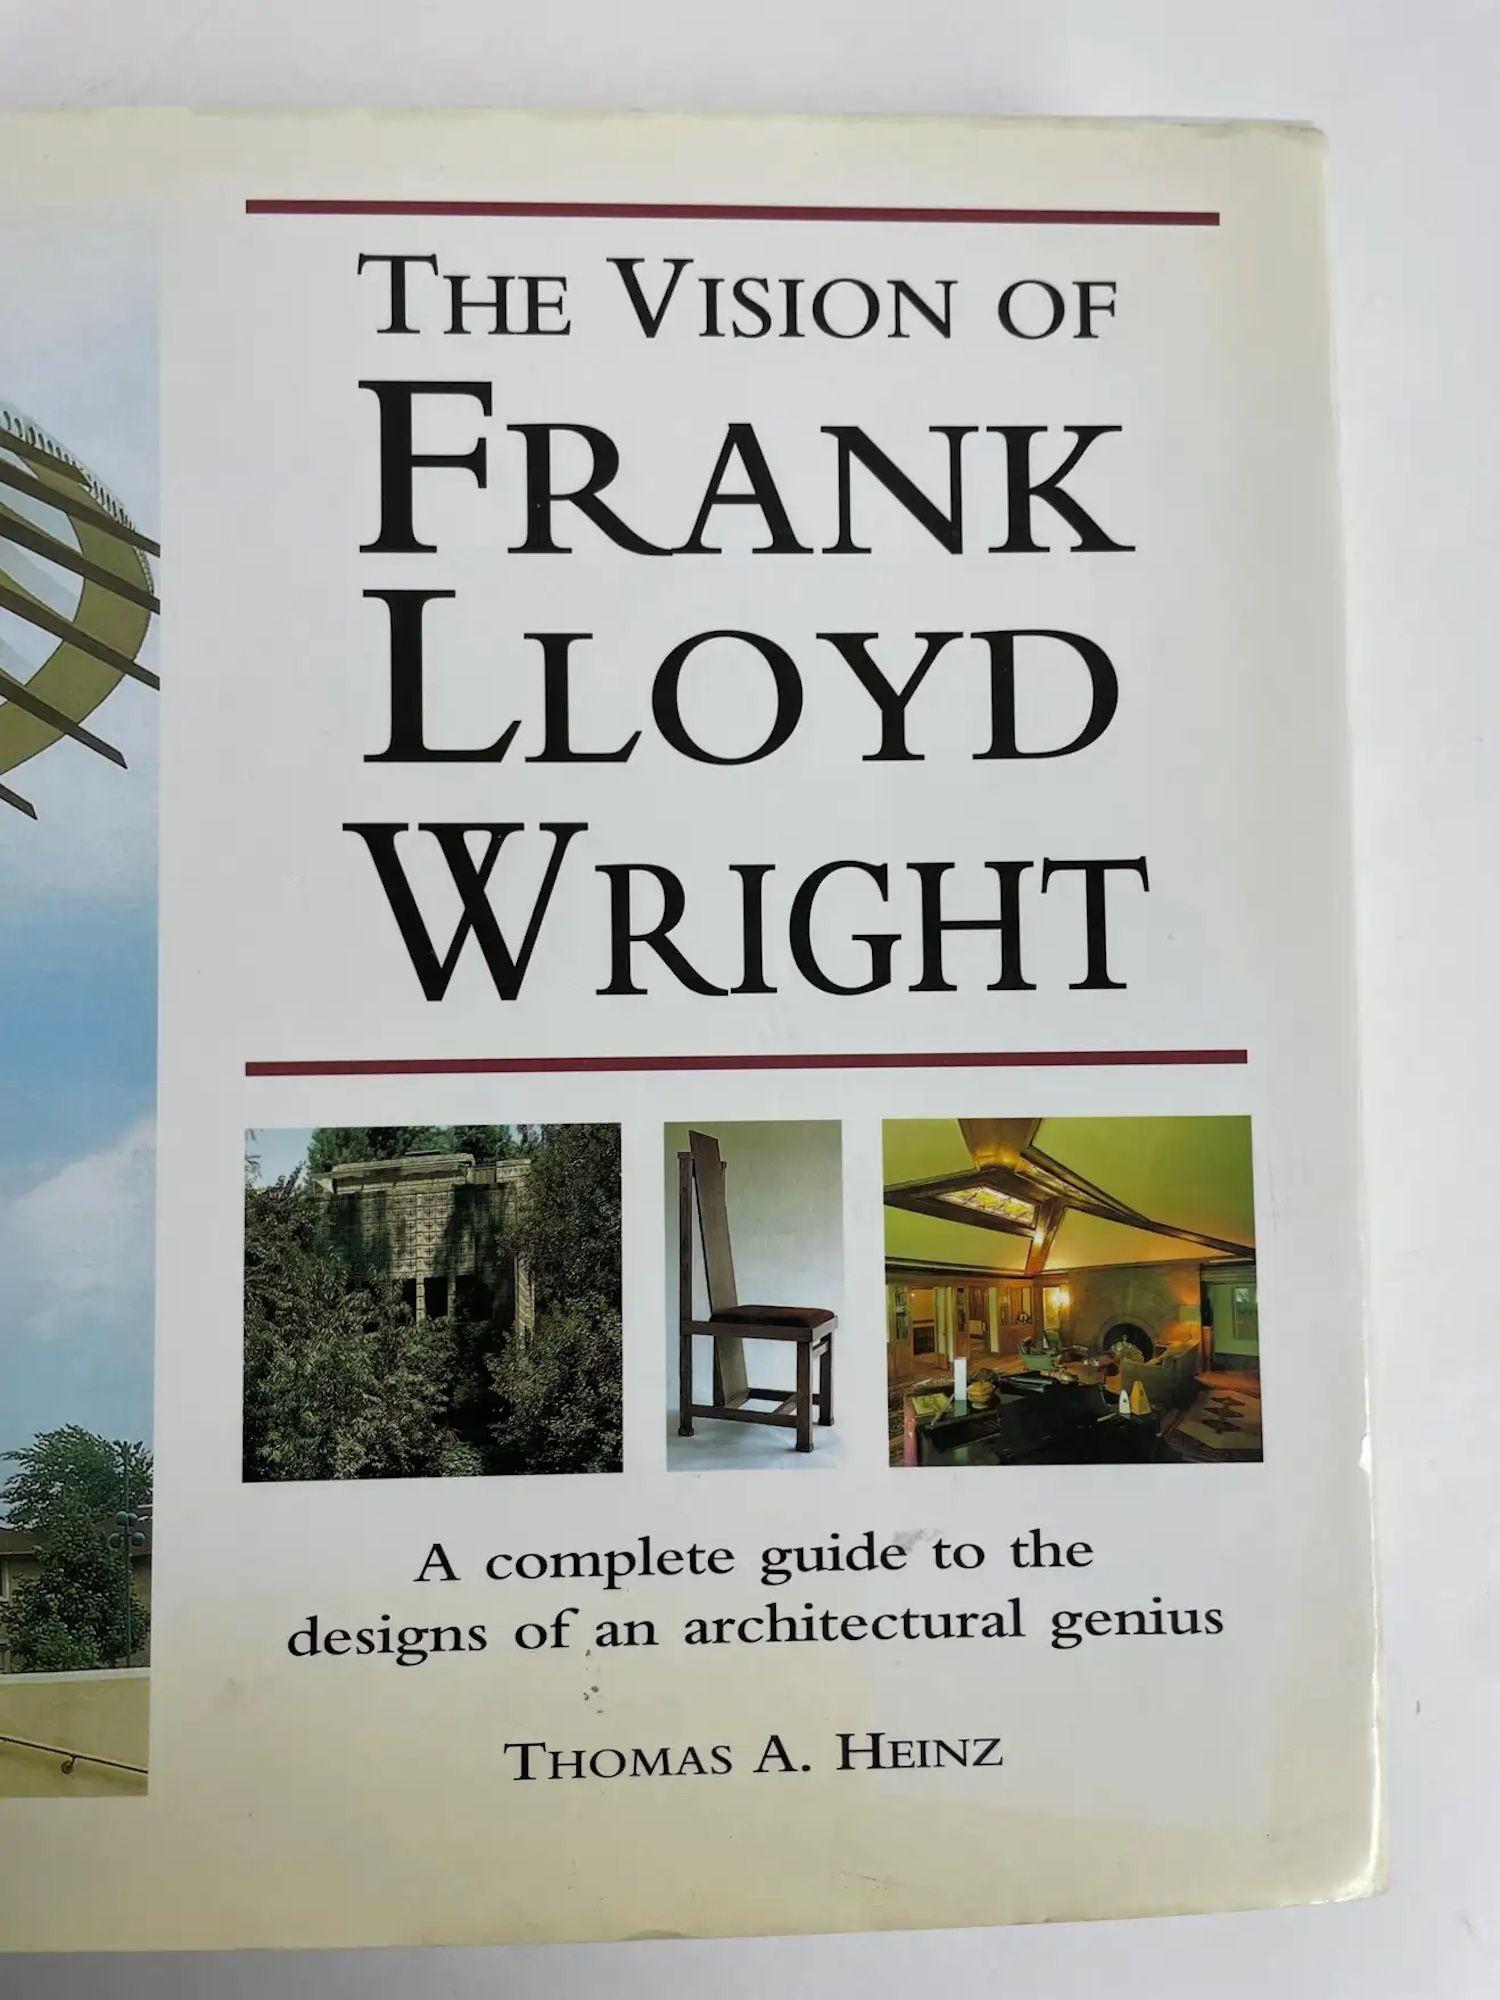 Vision of Frank Lloyd Wright by Thomas a. Heinz Hardcover Book 1st Edition For Sale 8